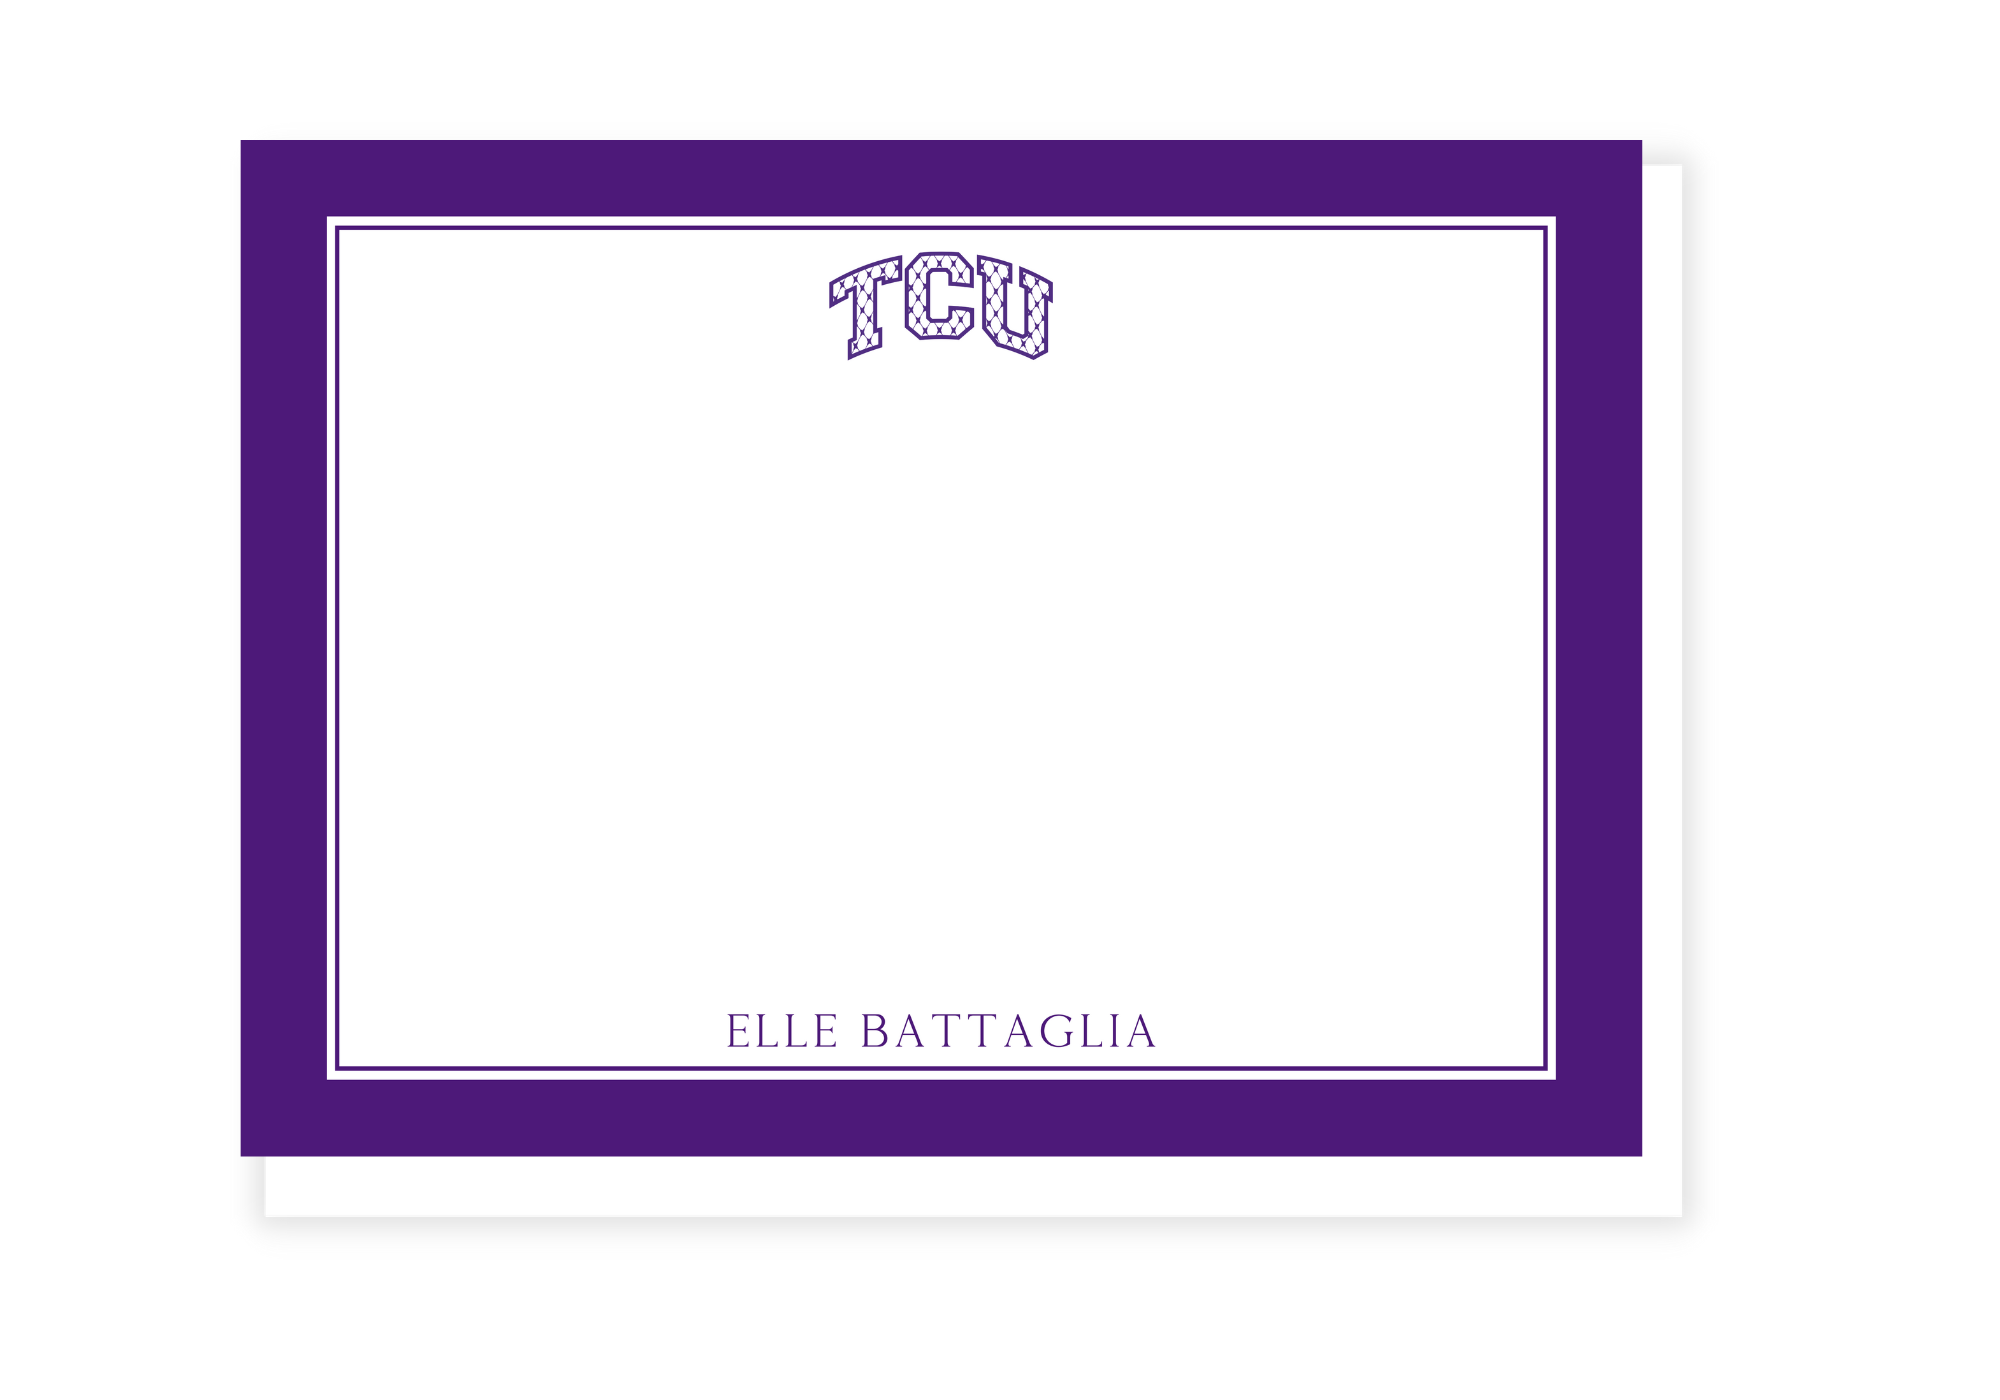 Go Frogs Stationery - Custom College Stationery